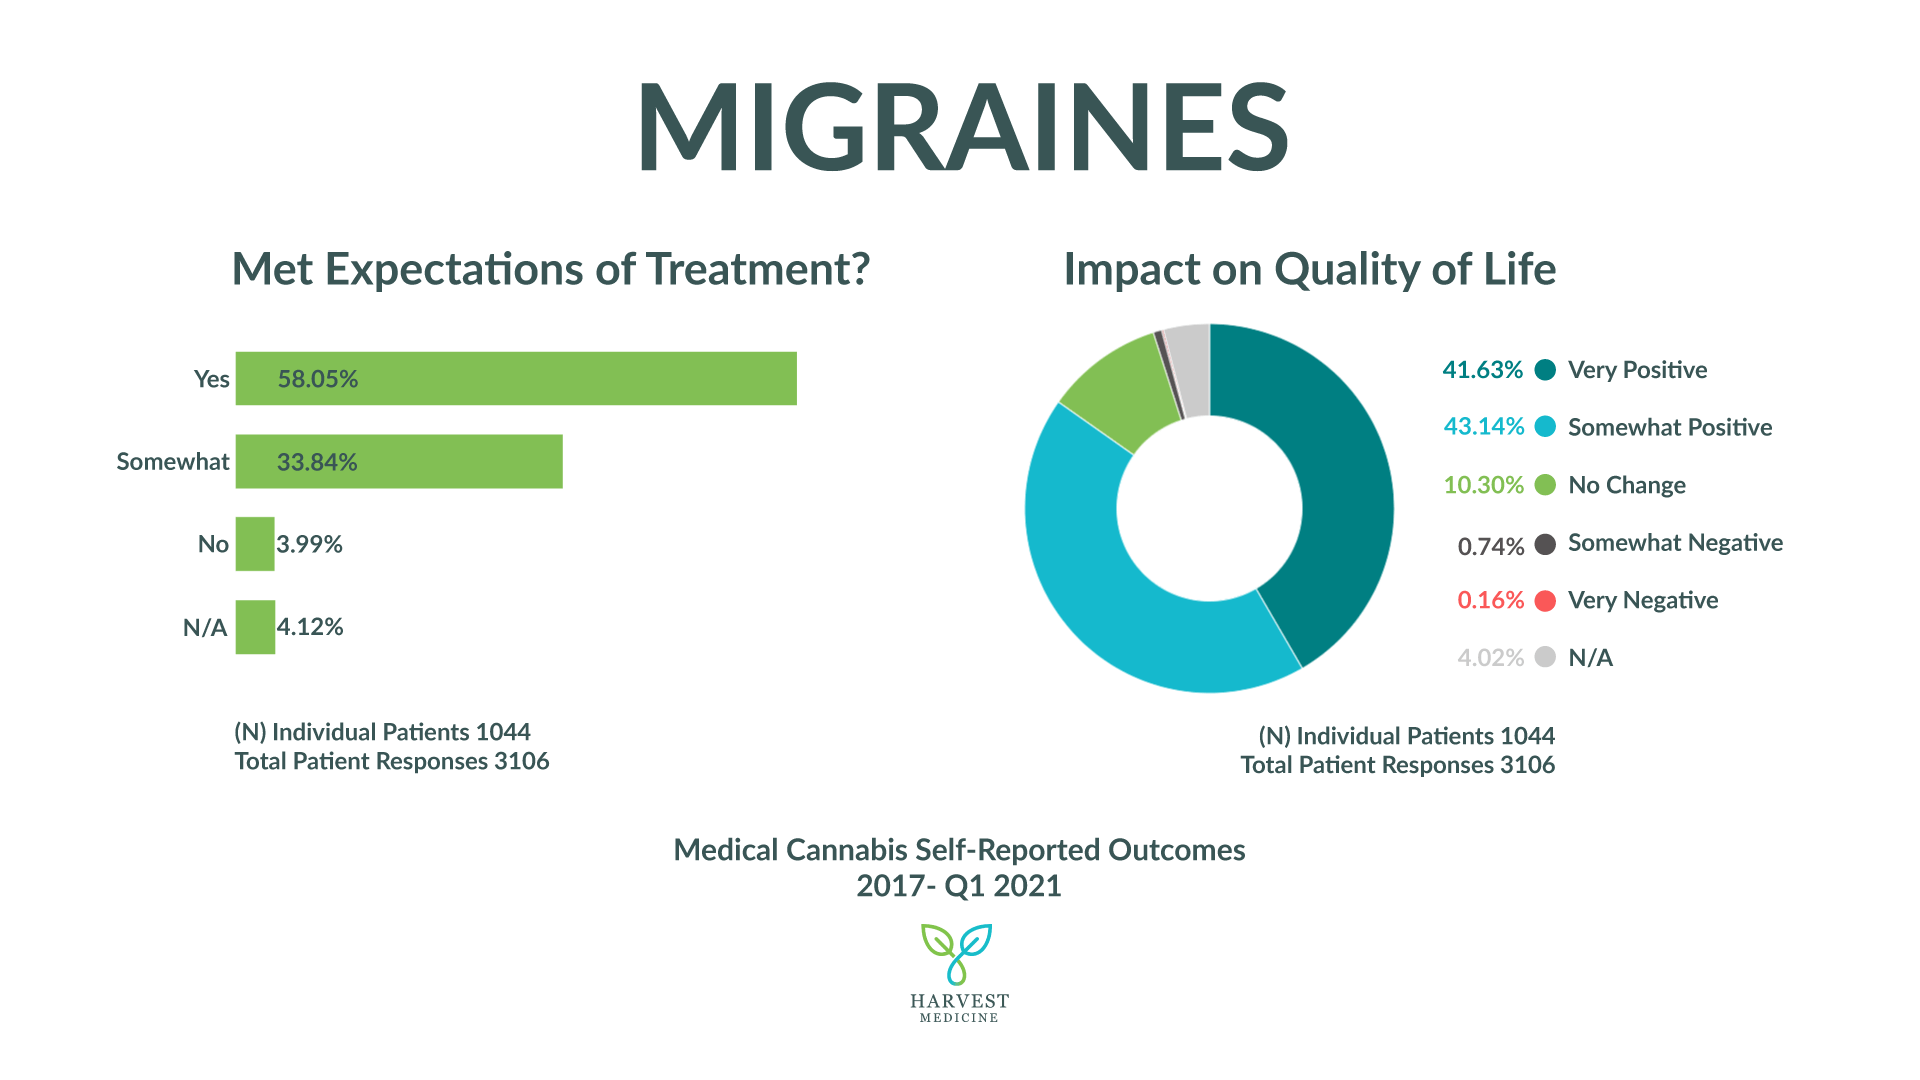 Harvest Medicine's patient self-reported outcomes for migraines from 2017-2021. Sample size 1044